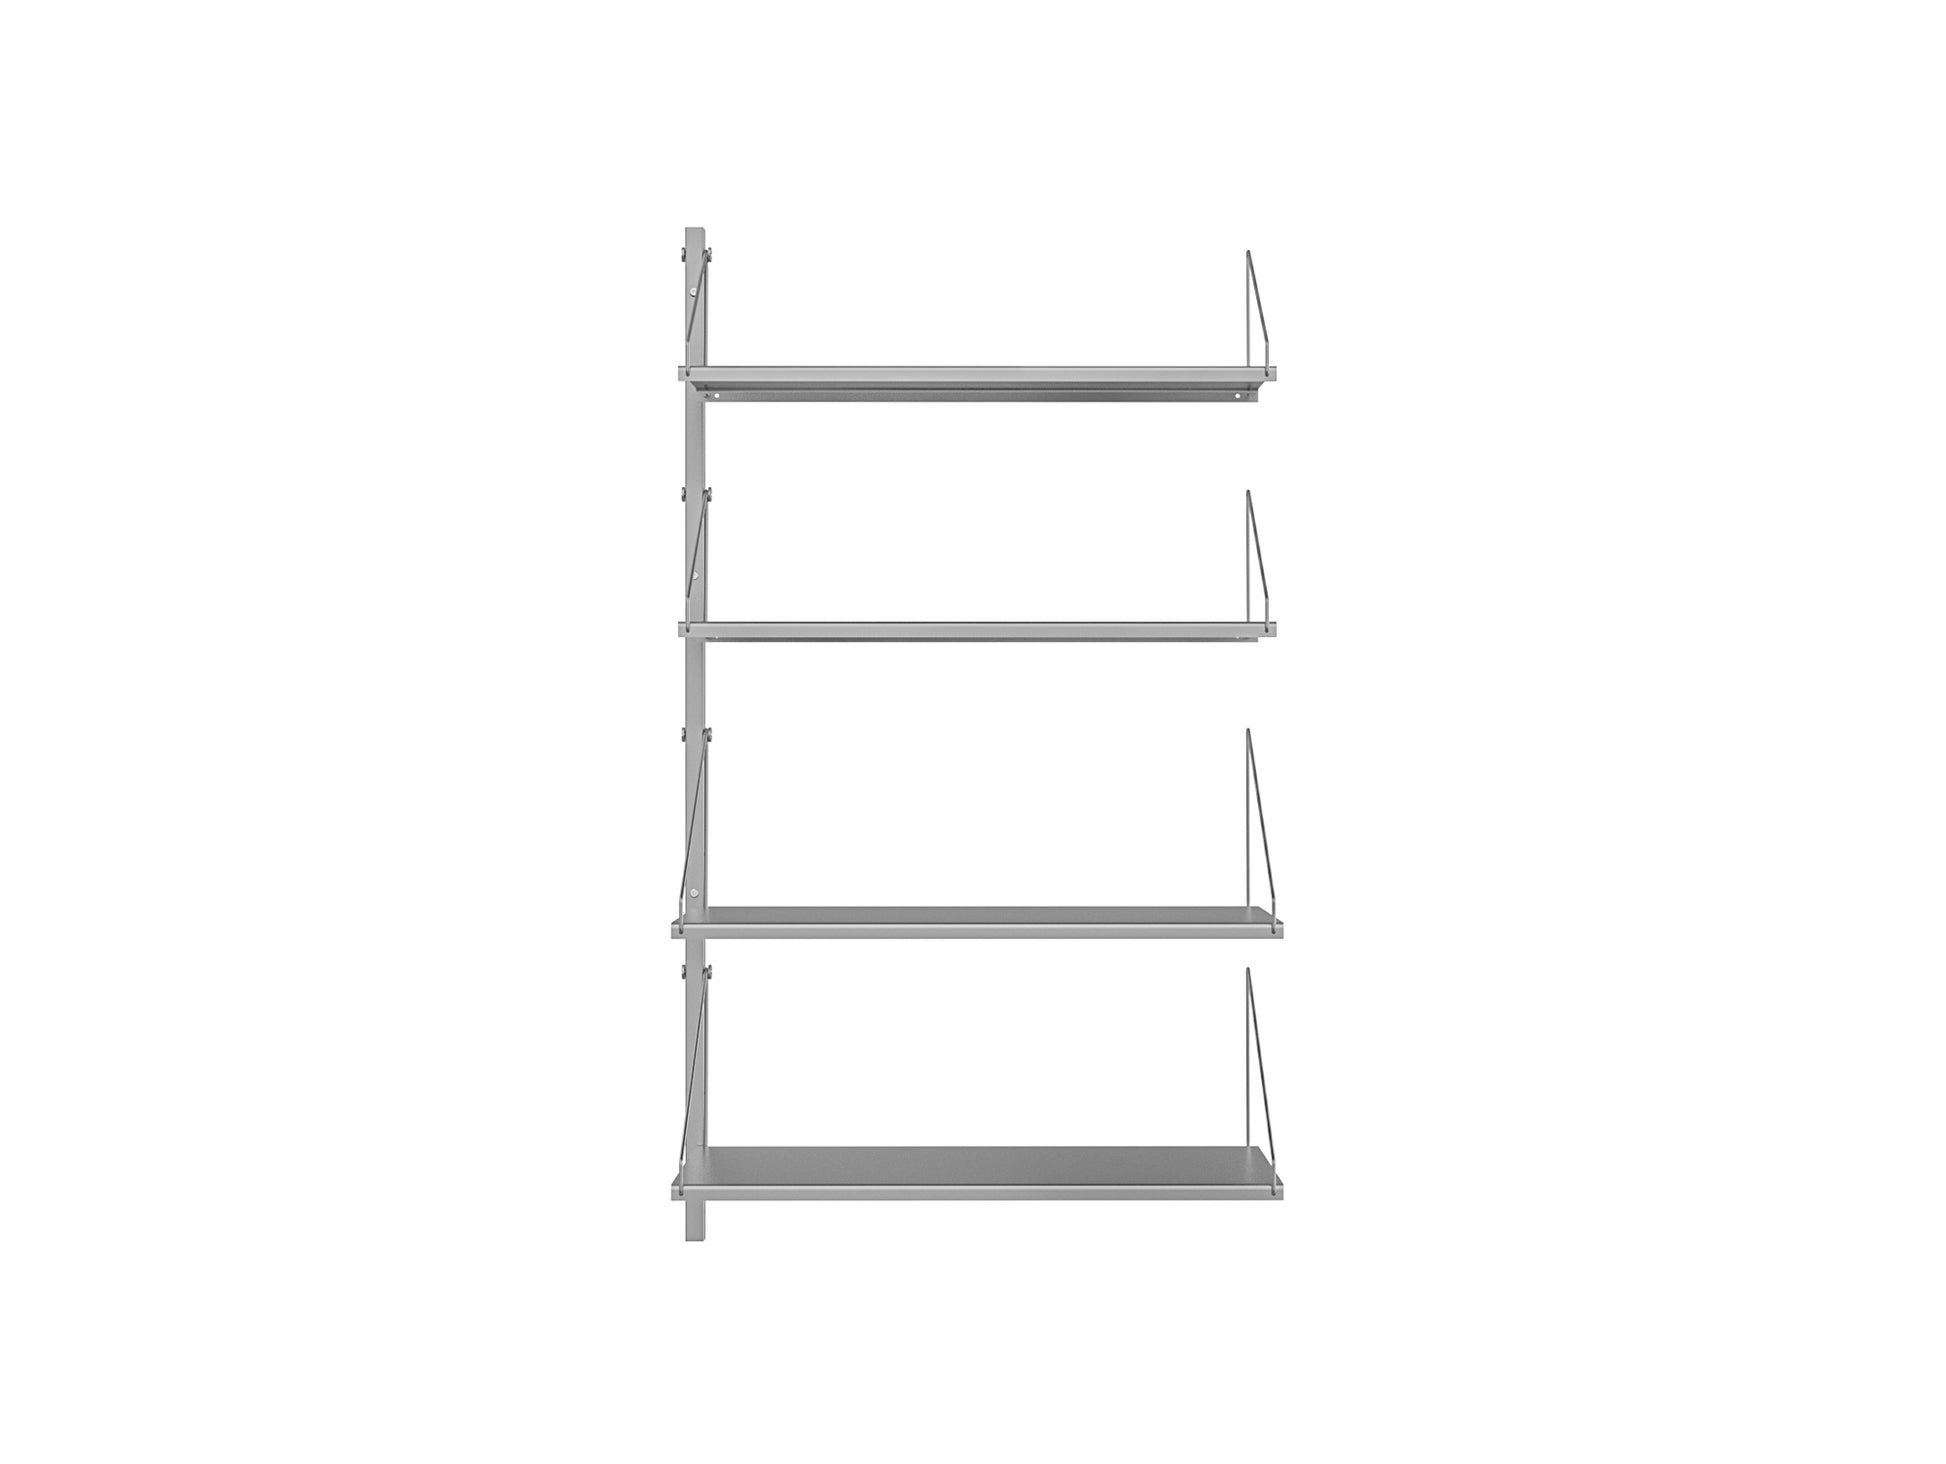 Shelf Library Stainless Steel Add-ons by Frama - H1084 / W60 Section